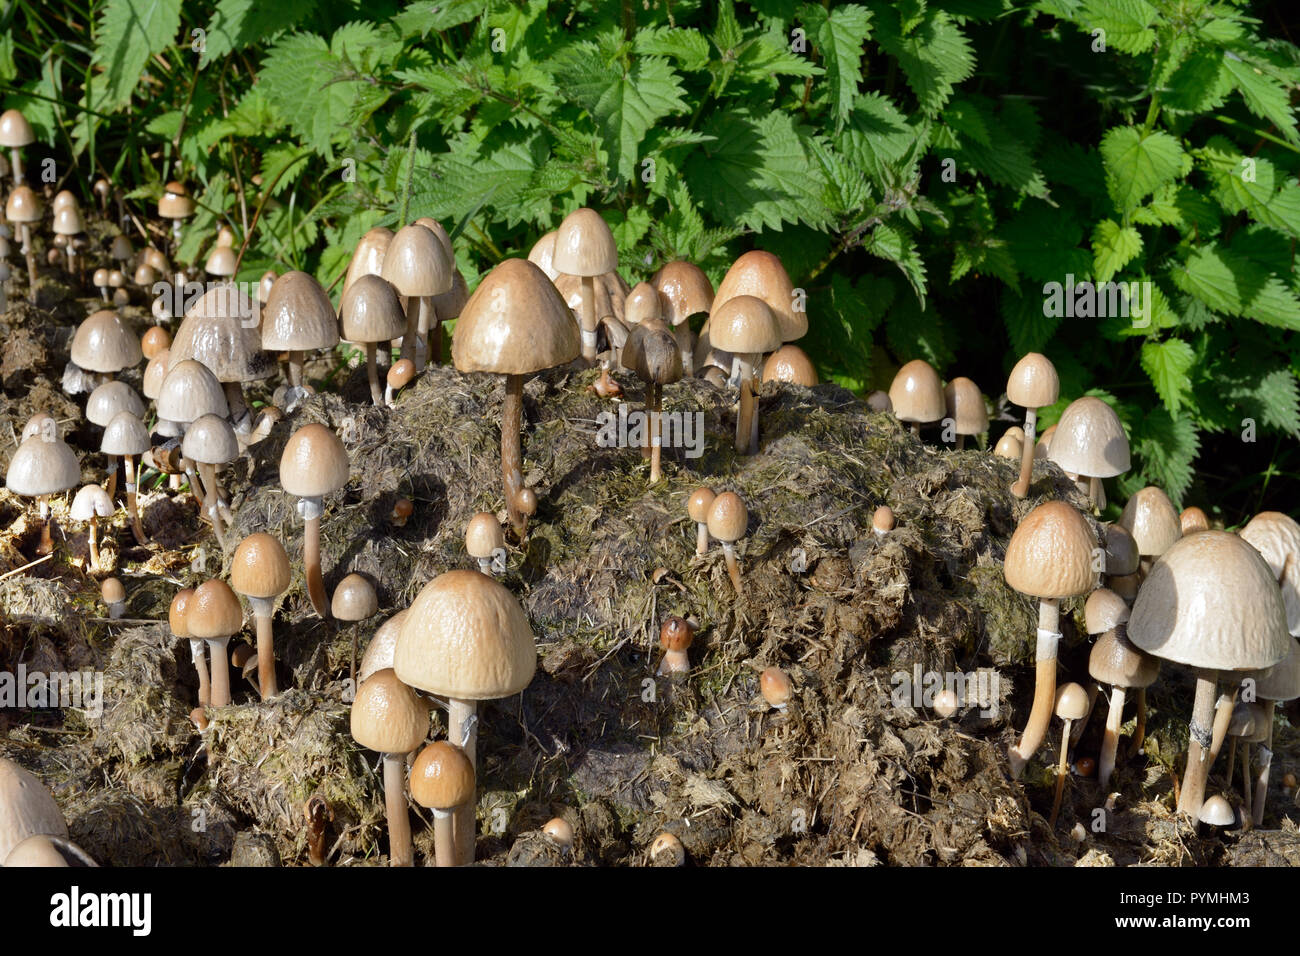 Panaeolus semiovatus is a saprobic fungus or toadstool often found in clusters on horse dung. Stock Photo